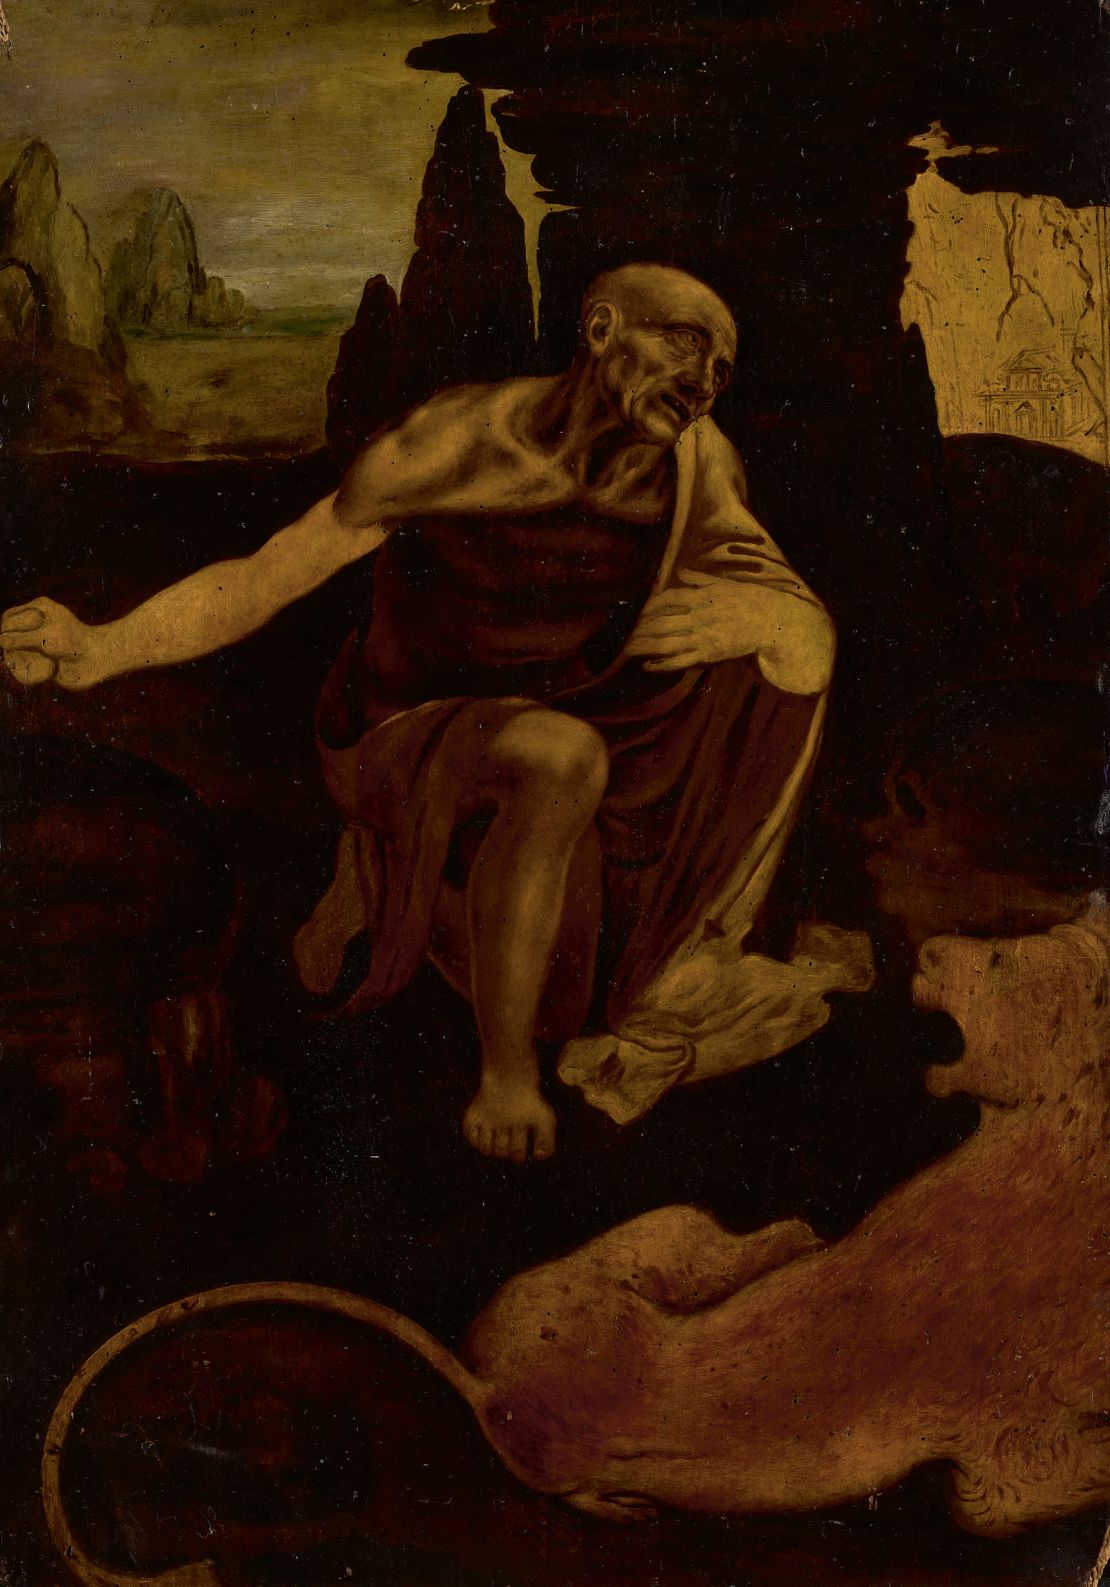 Sotheby's believes this to be the only known to-scale replica of Leonardo da Vinci's "Saint Jerome Praying in the Wilderness."